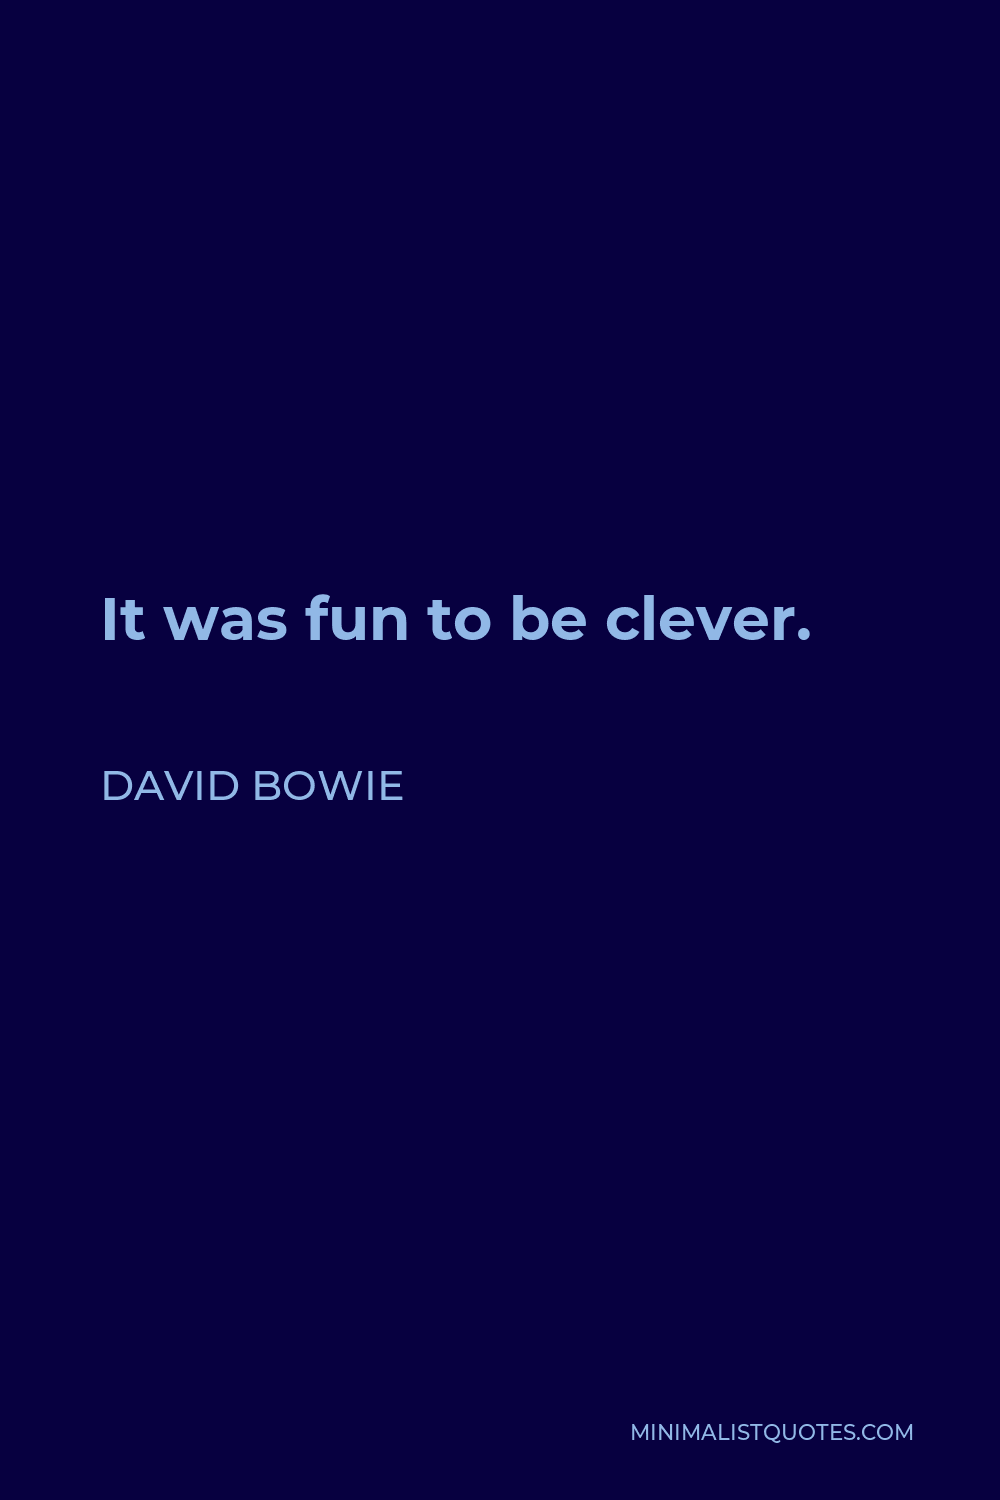 David Bowie Quote - It was fun to be clever.